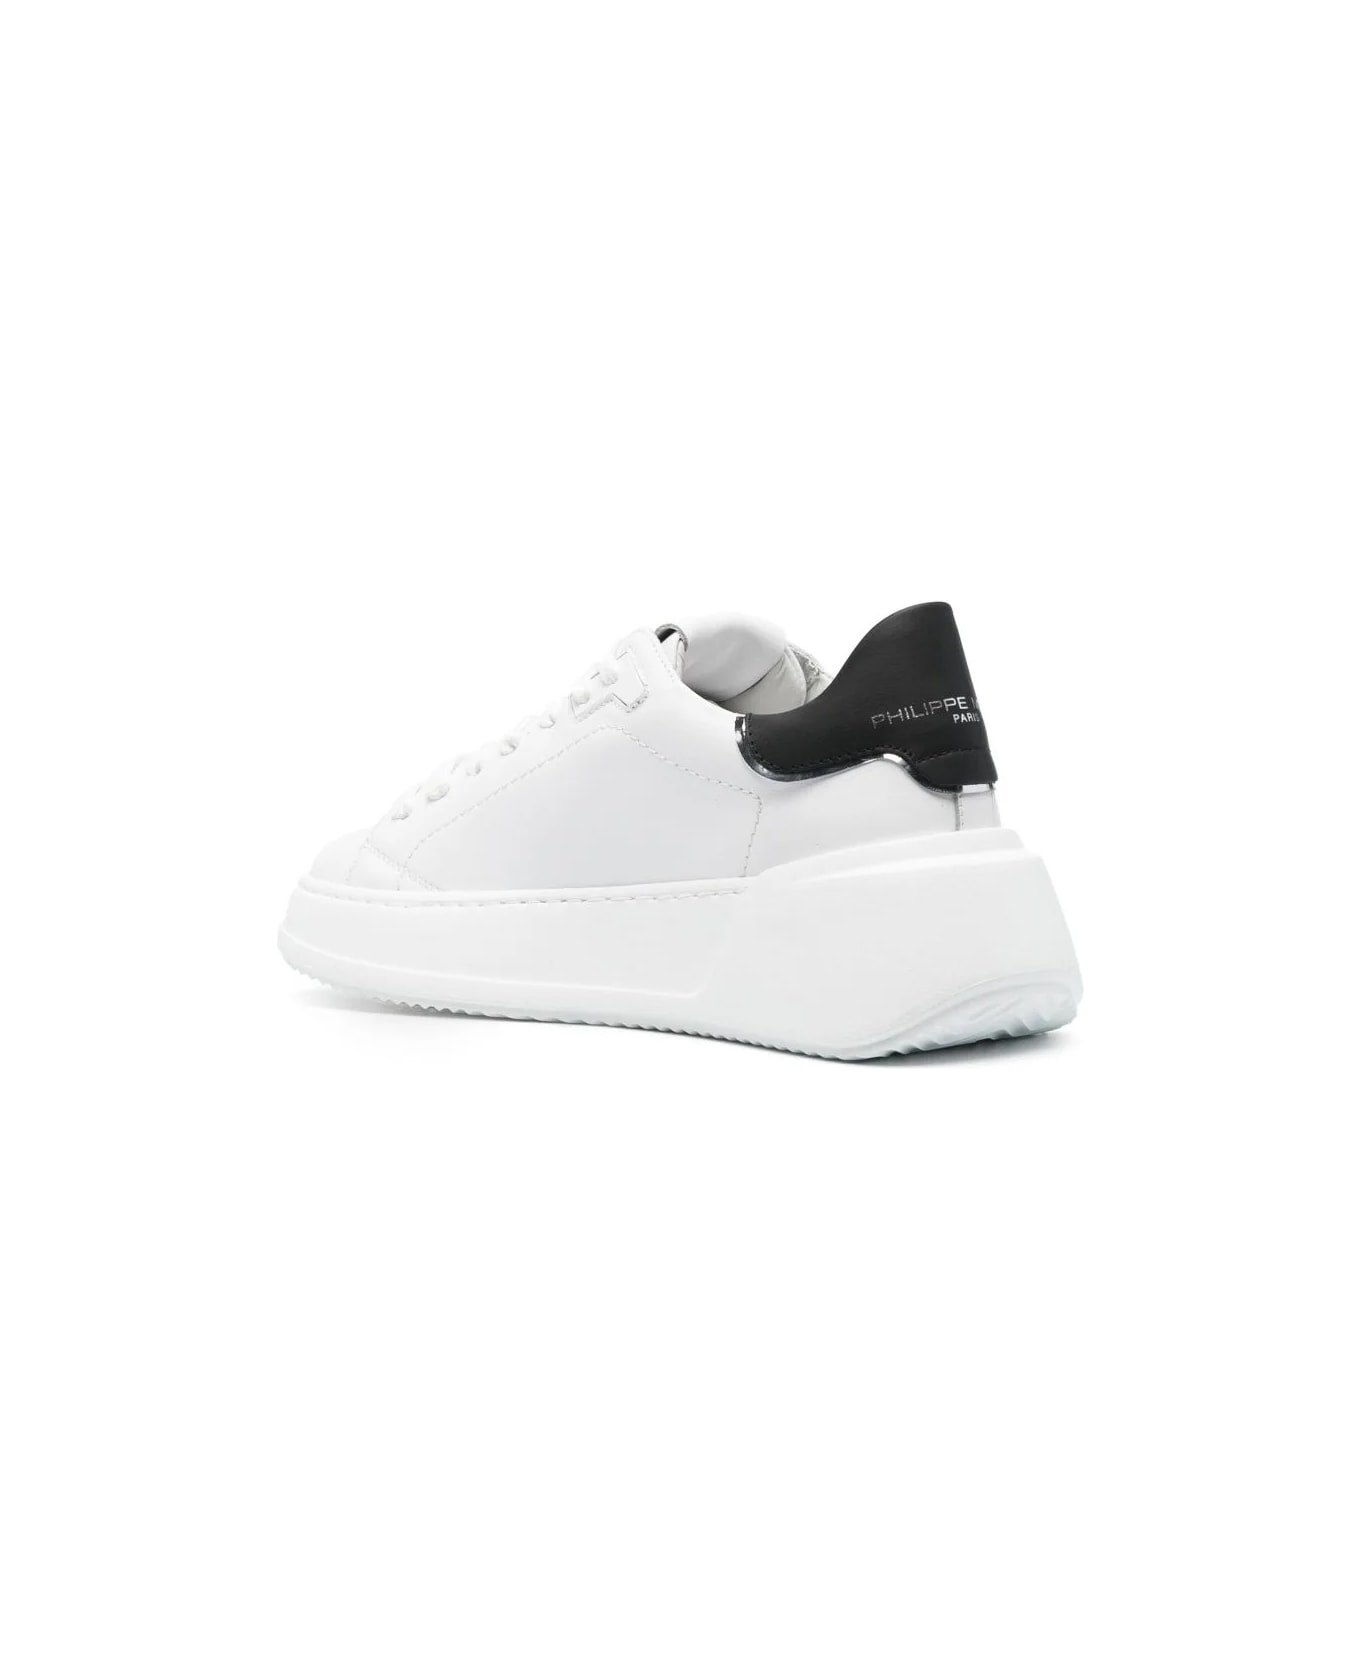 Philippe Model Tres Temple Sneakers - White And Black - White